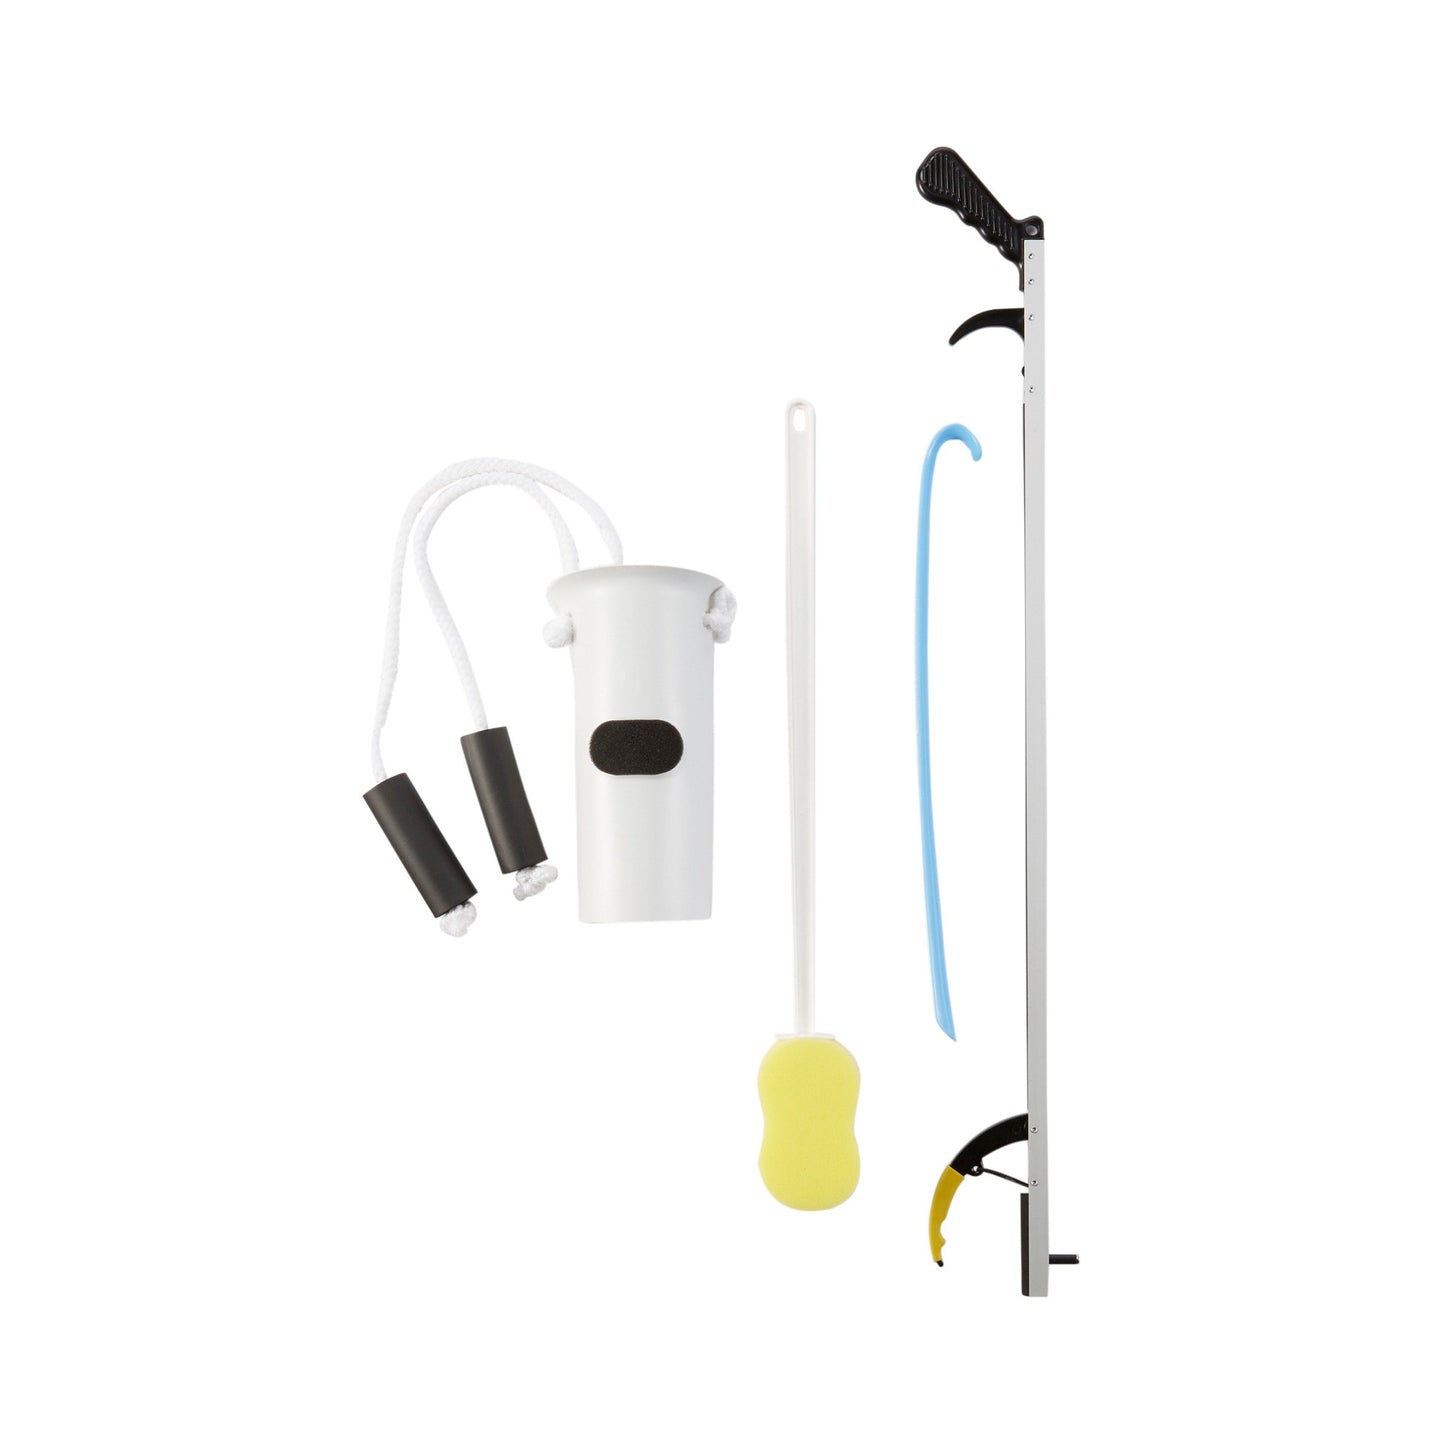 FabLife™ Hip Kit with 32 Inch Reacher and 18 Inch Plastic Shoehorn